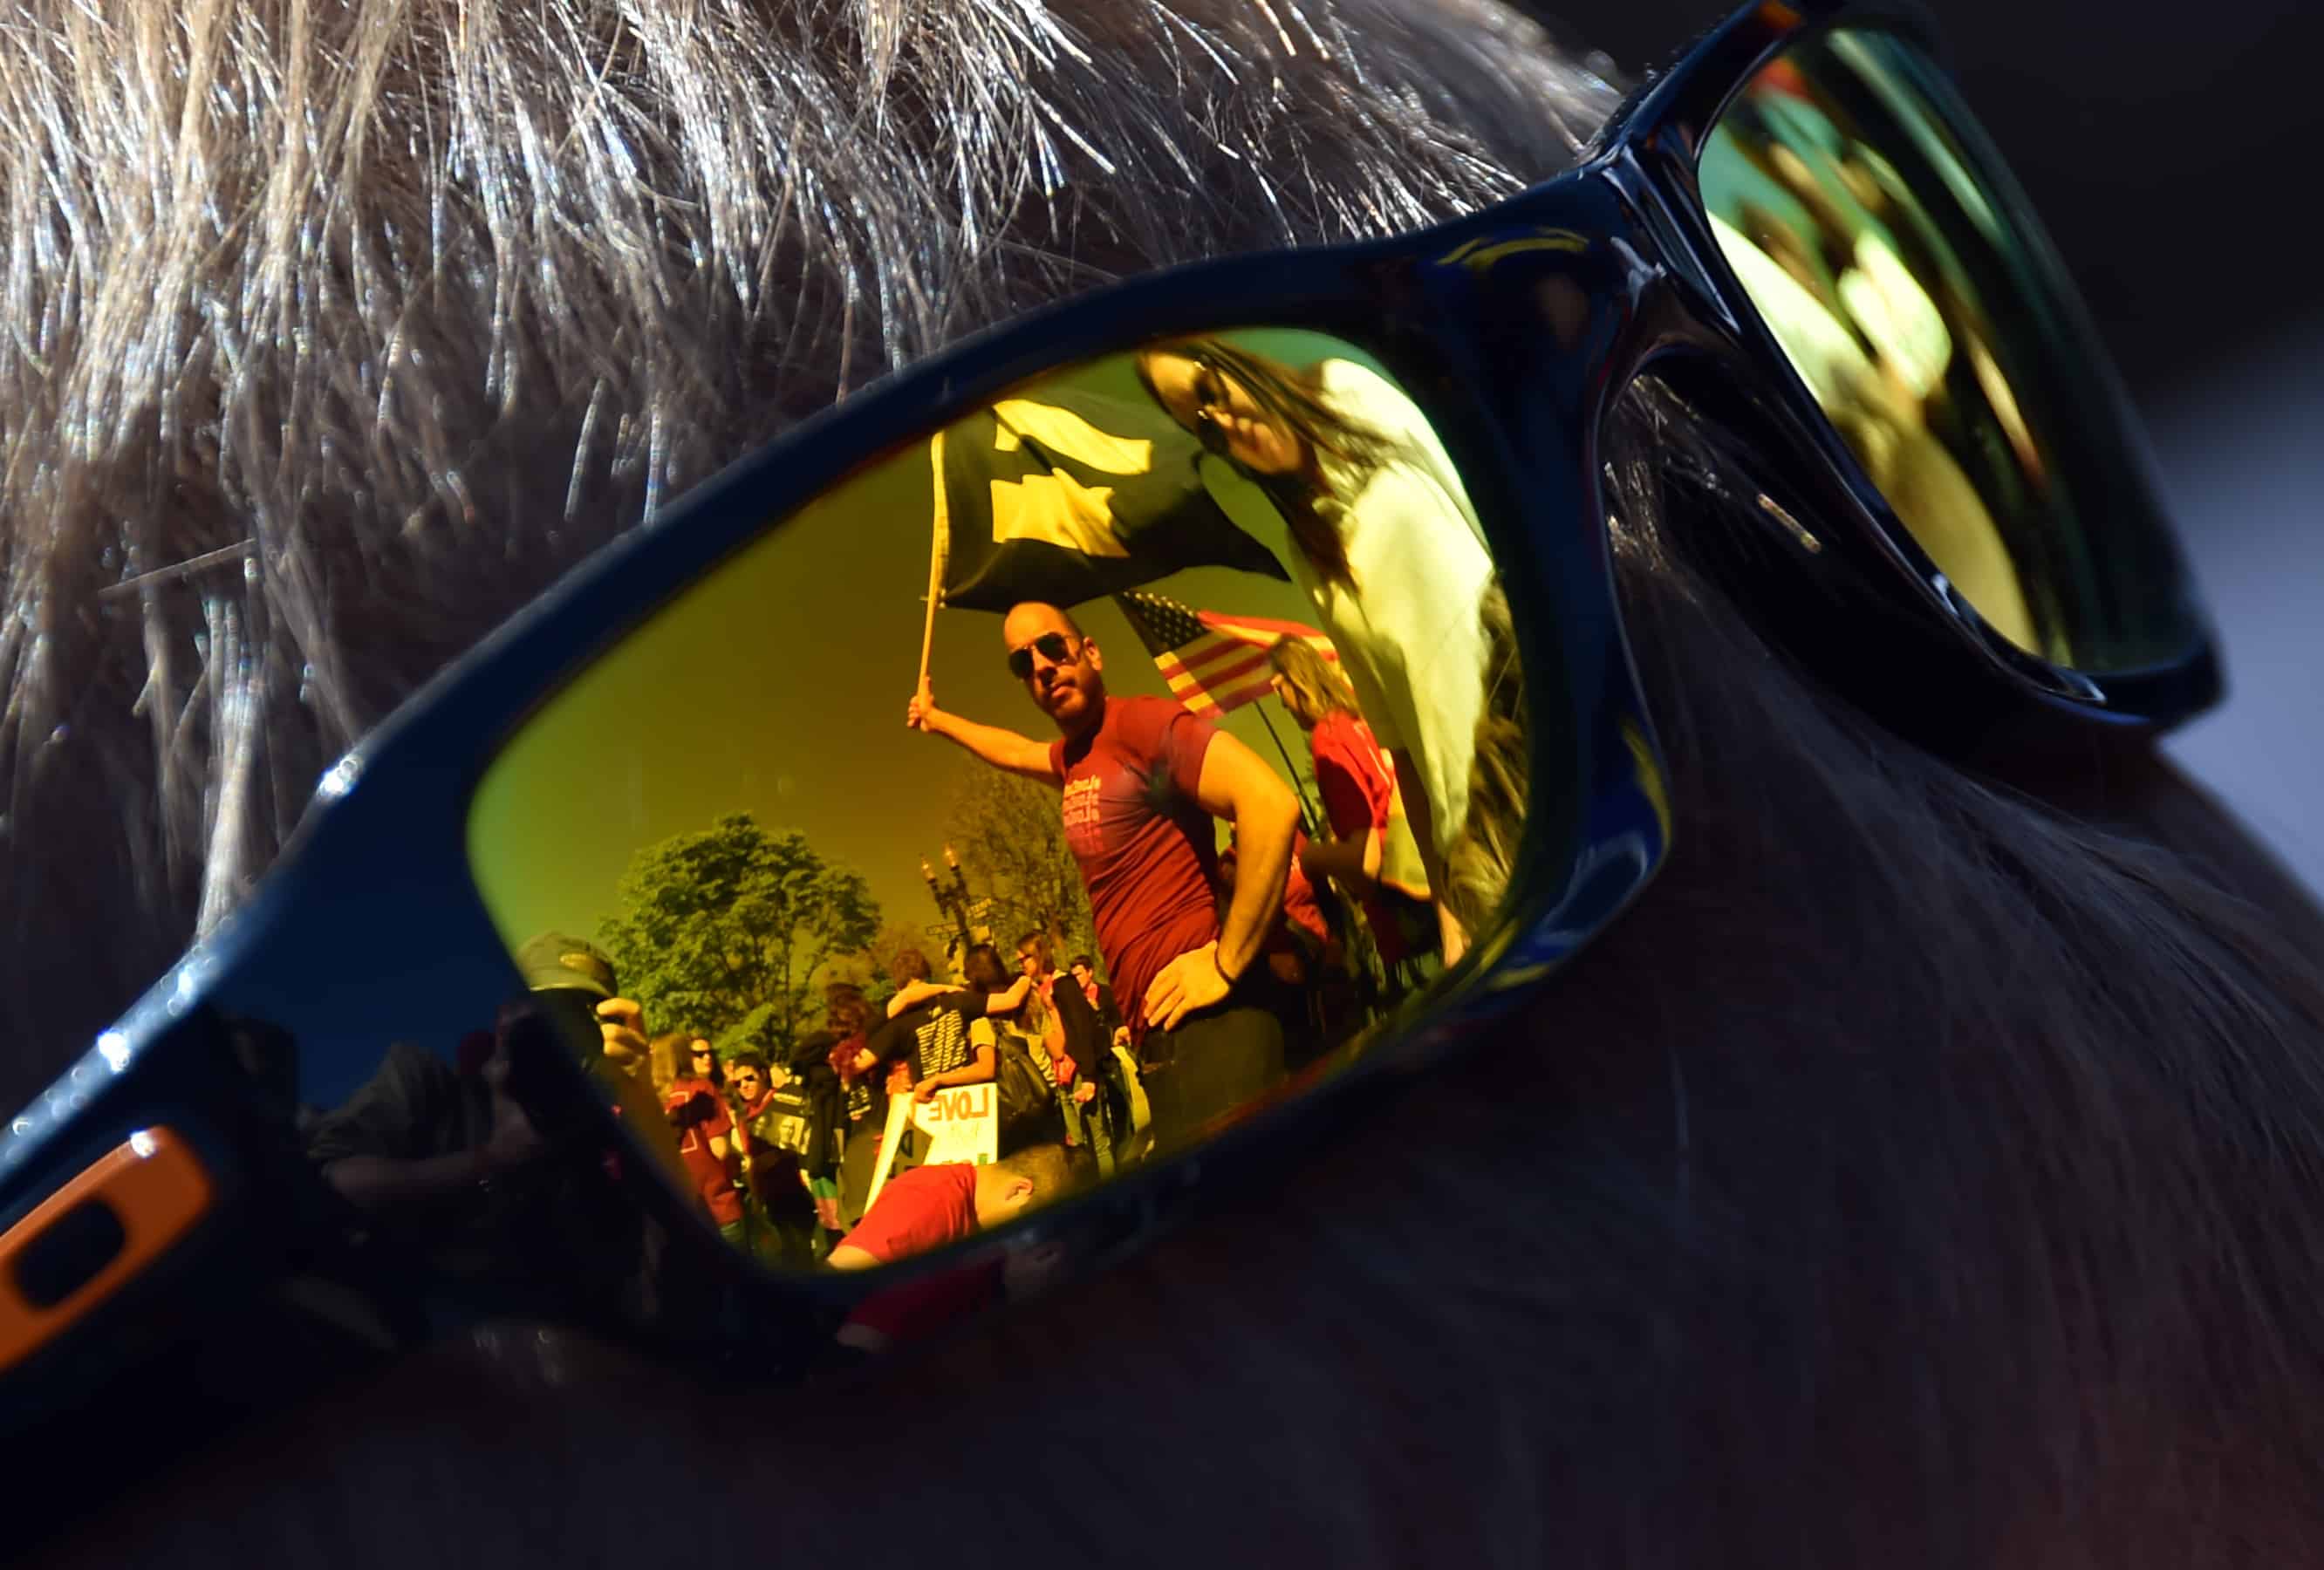 Sunglasses reflect supporters of same-sex marriages standing outside the U.S. Supreme Court as they wait for its decision on whether gay couples have a constitutional right to wed, April 28, 2014 in Washington, D.C.